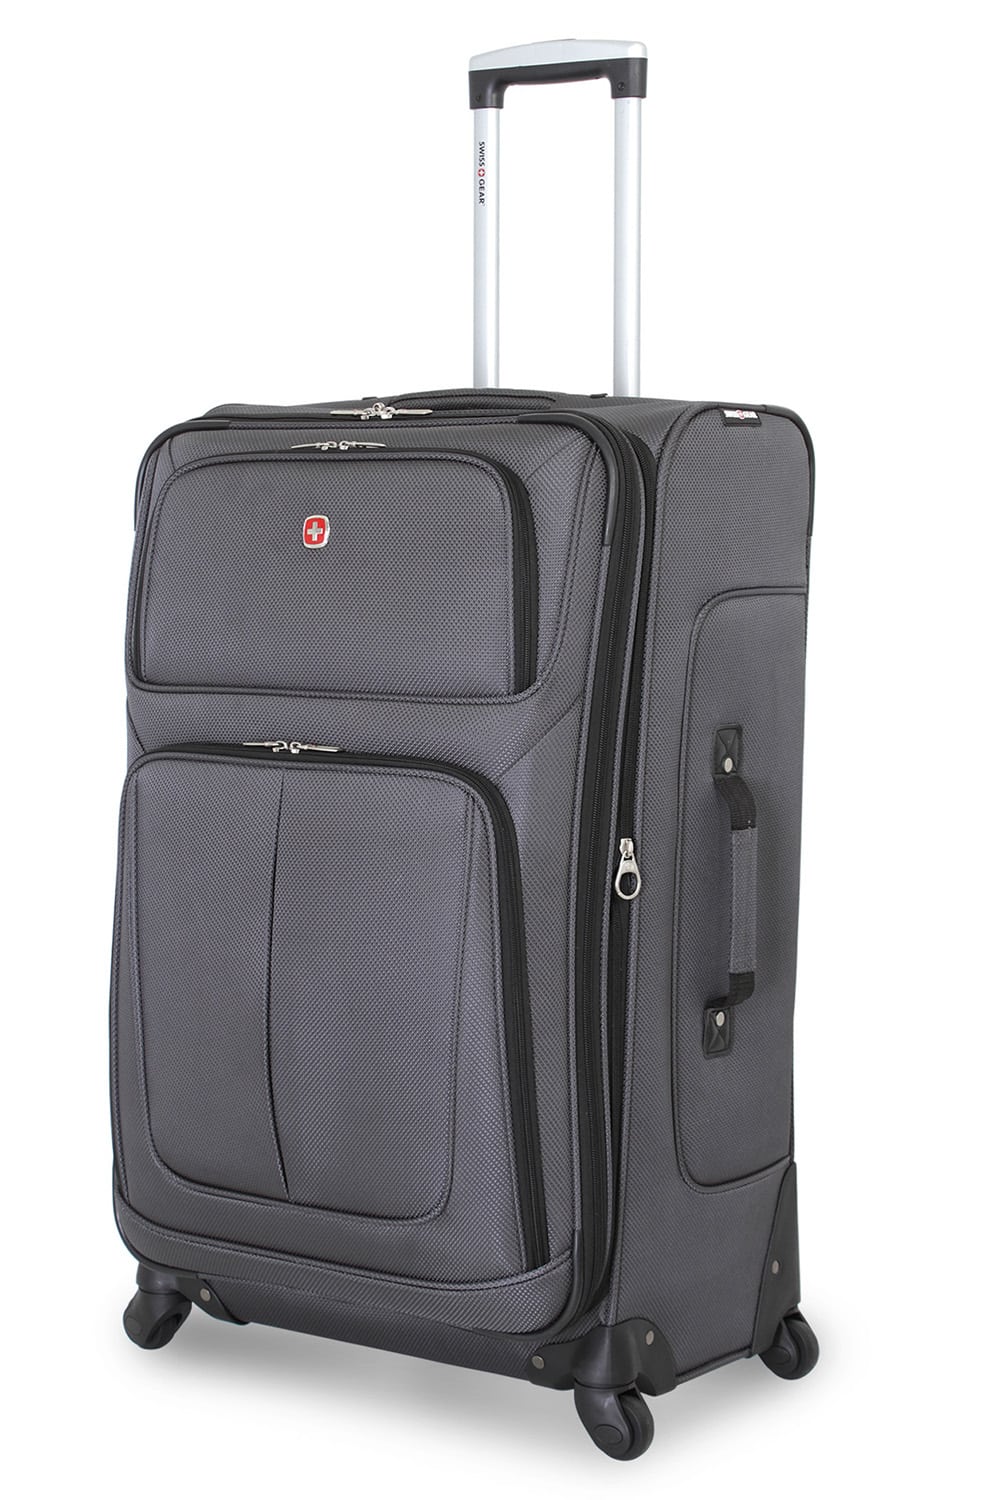 SWISSGEAR 6283 29 Expandable Spinner Luggage